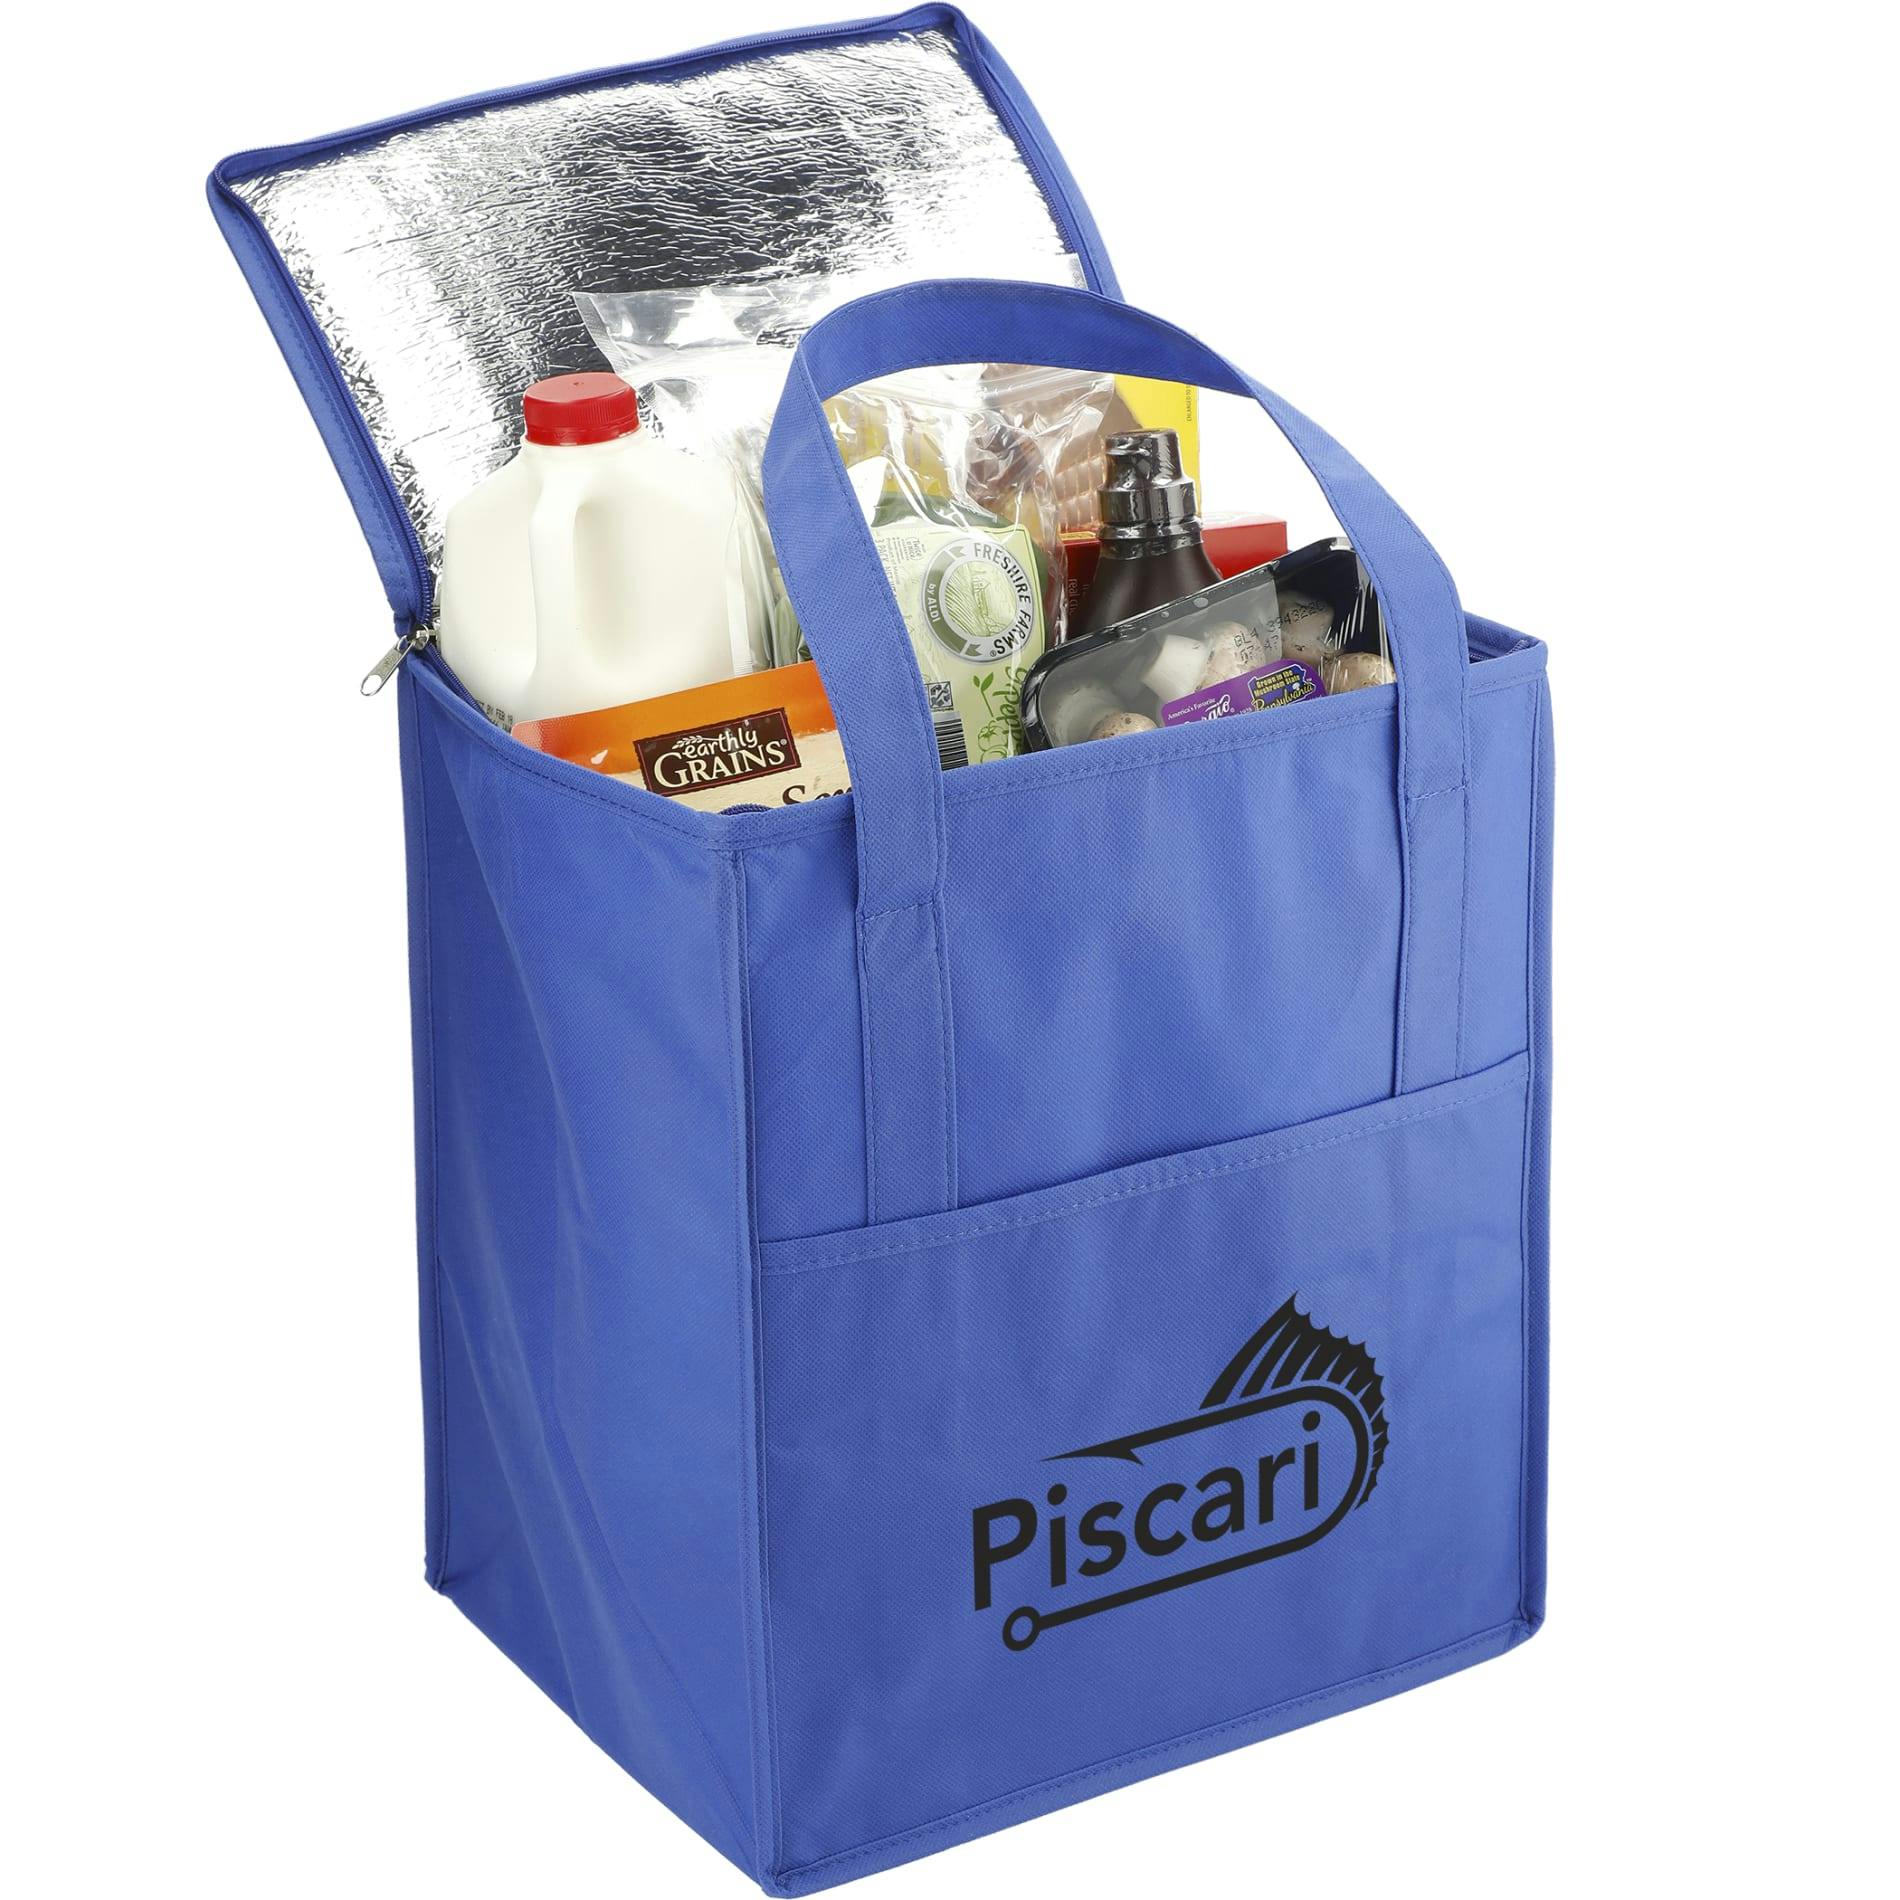 Hercules Flat Top Insulated Grocery Tote - additional Image 1